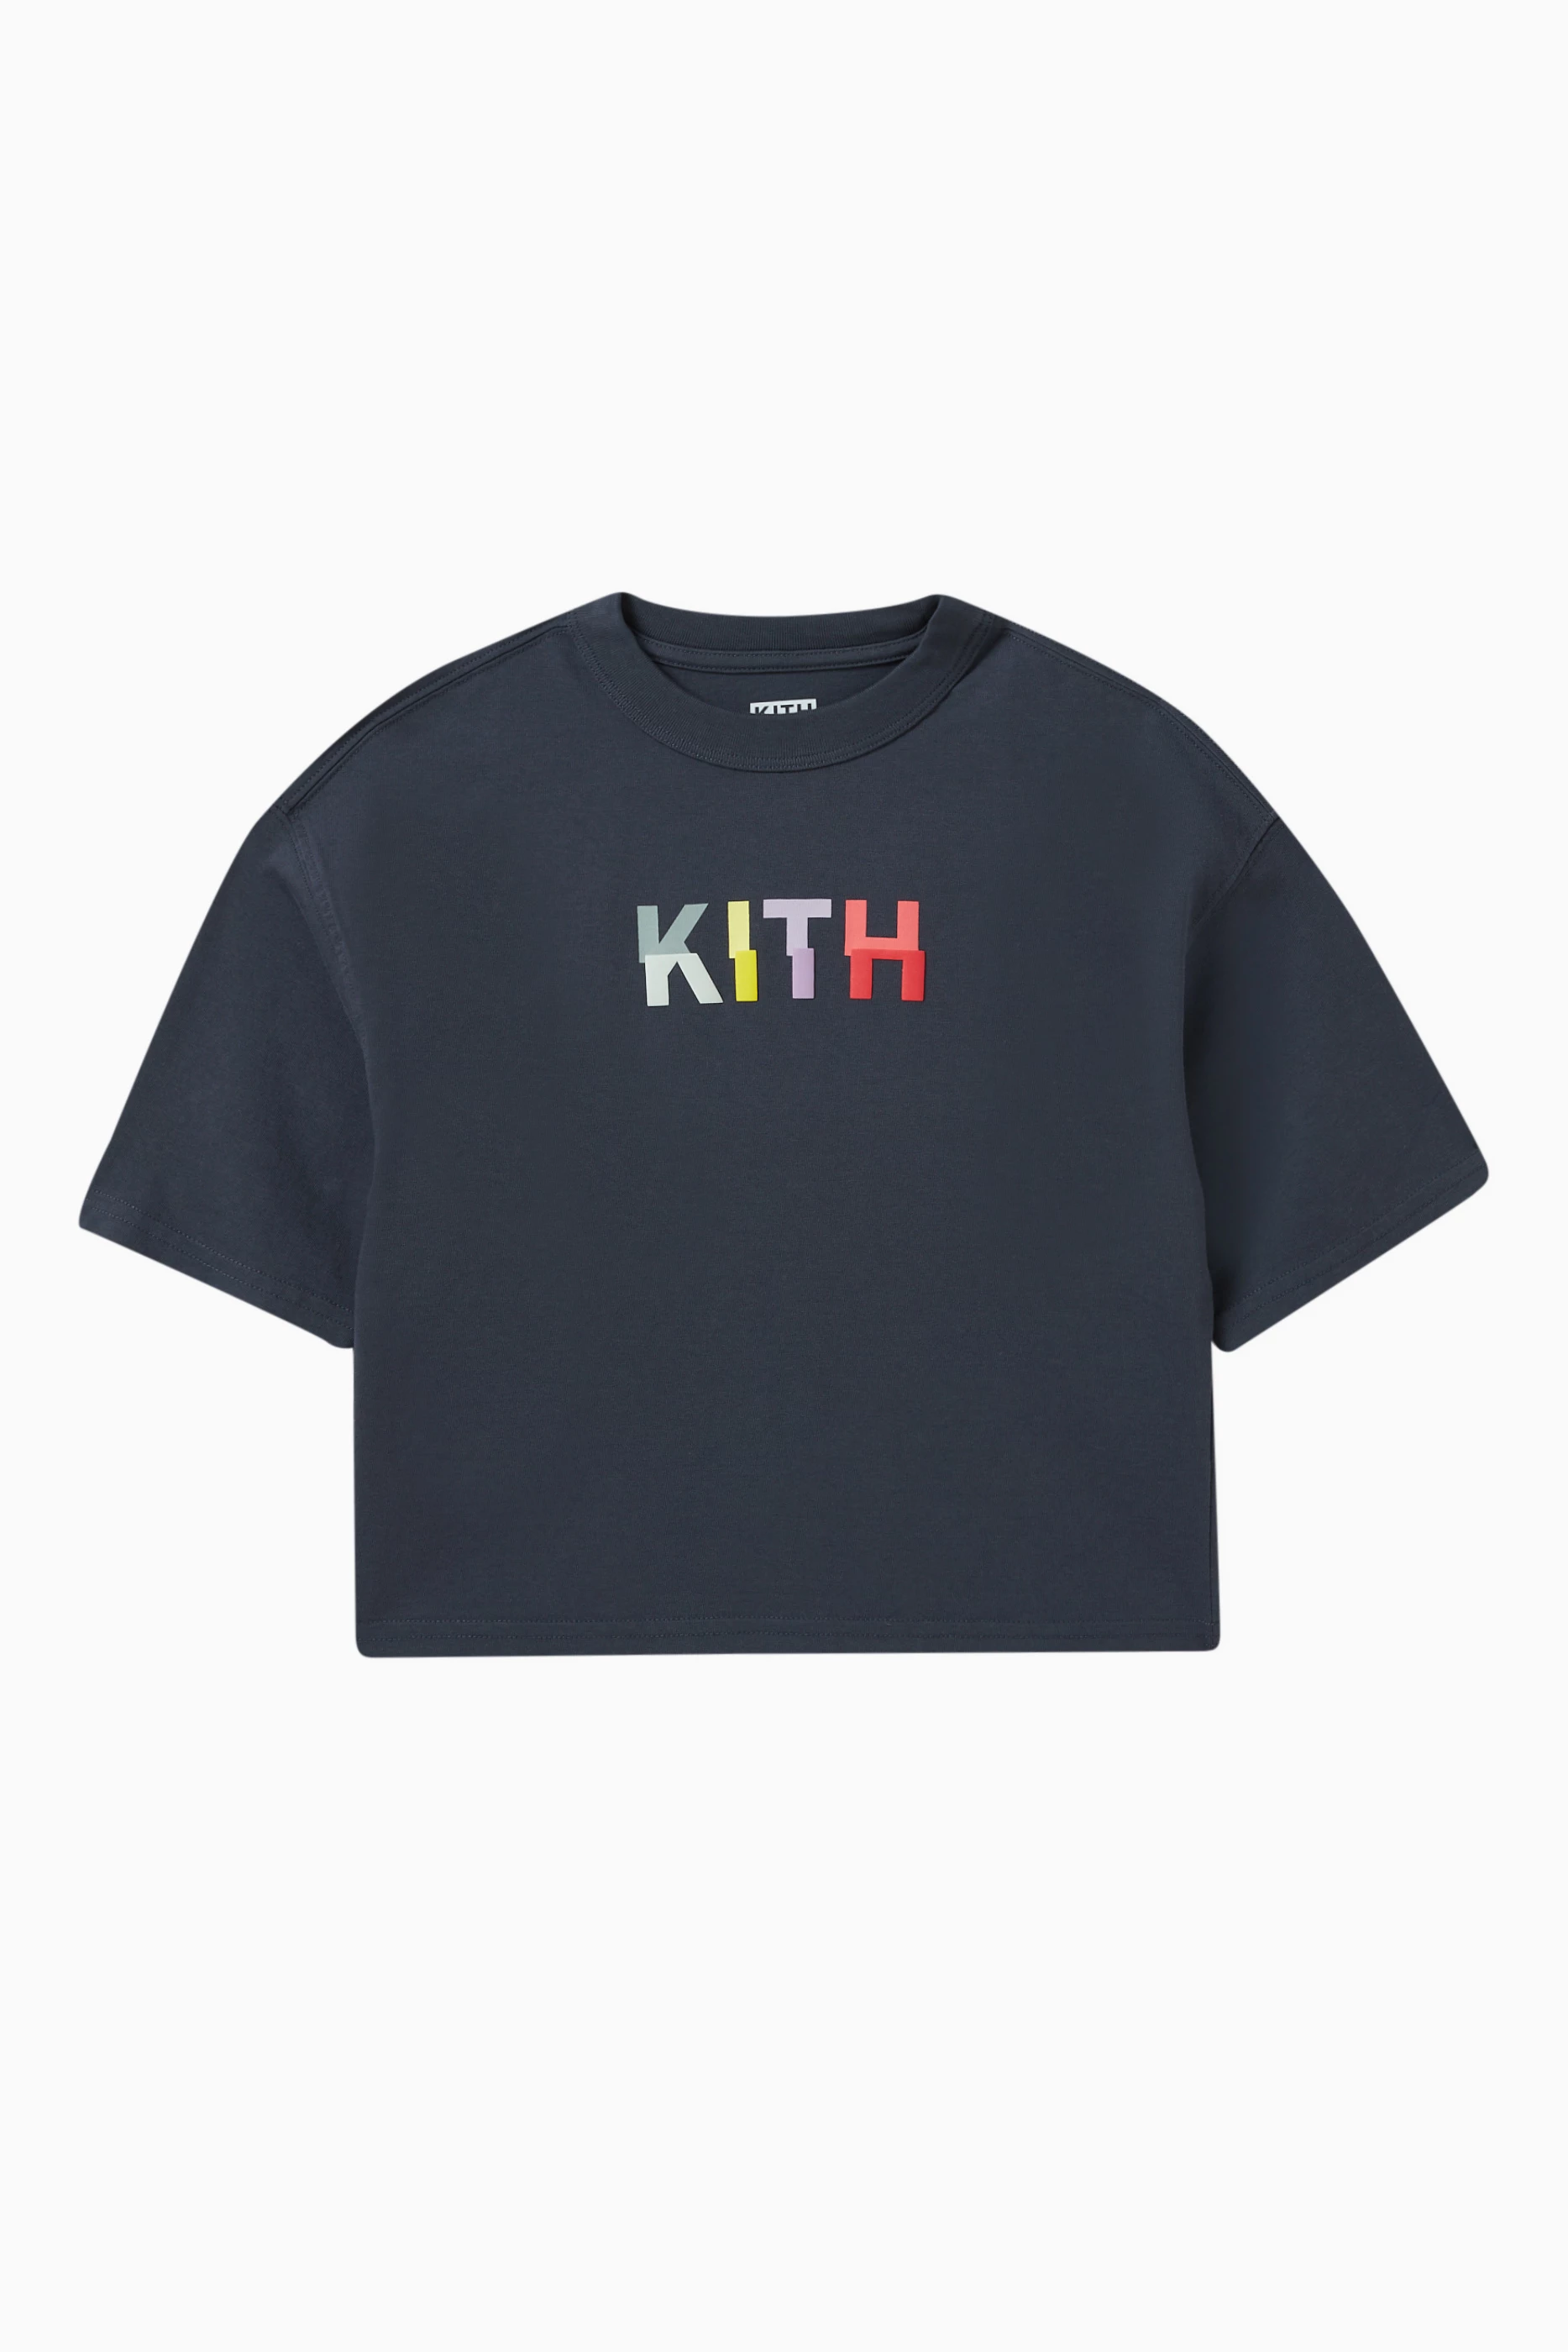 Buy Kith Black Novelty Logo Graphic T-shirt in Cotton Online for ...